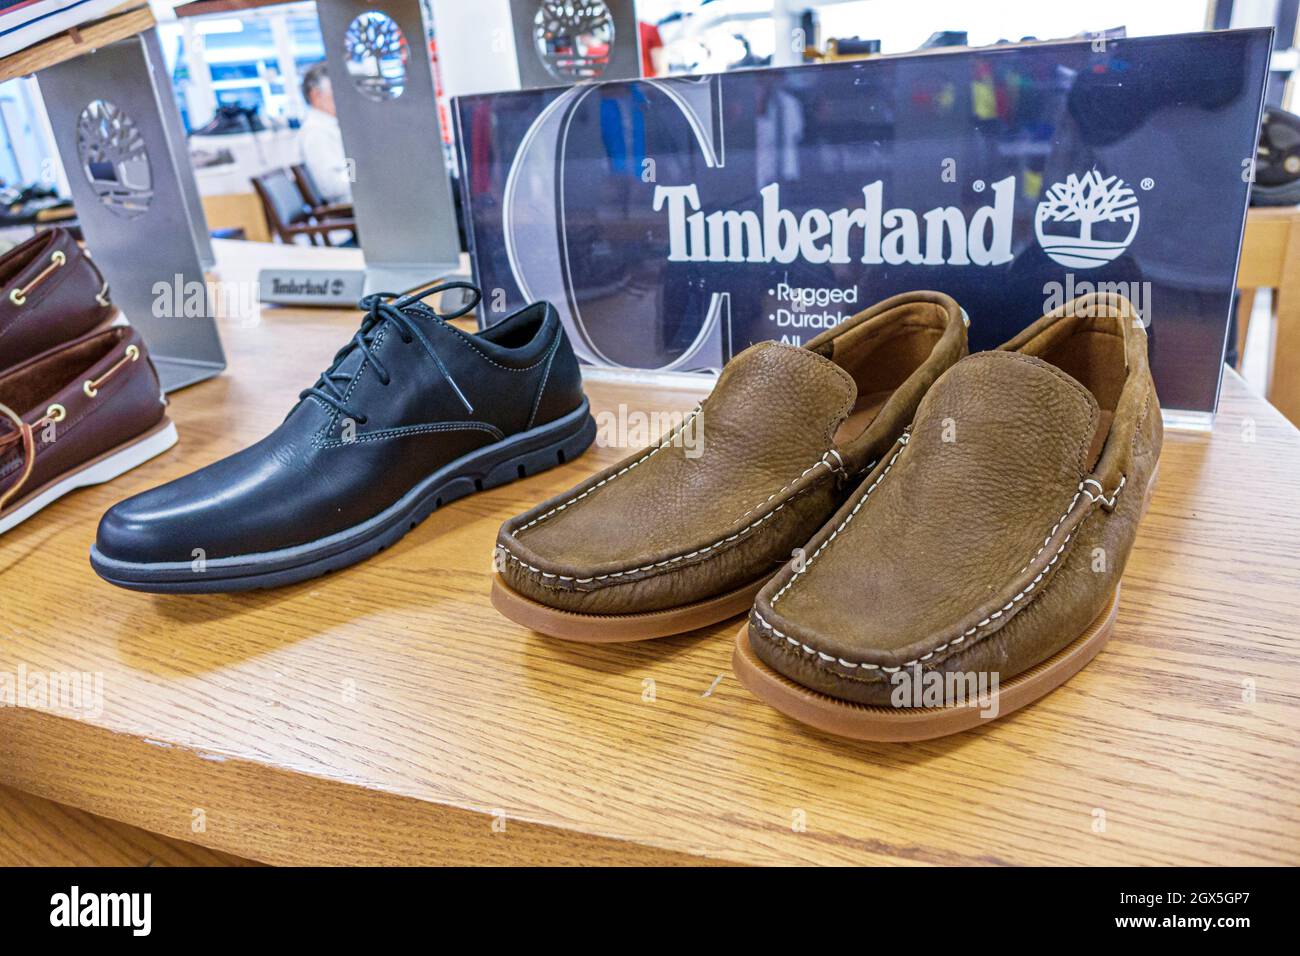 Miami Florida, Macy's, grand magasin, shopping intérieur exposition vente Timberland chaussures pour hommes mode Banque D'Images